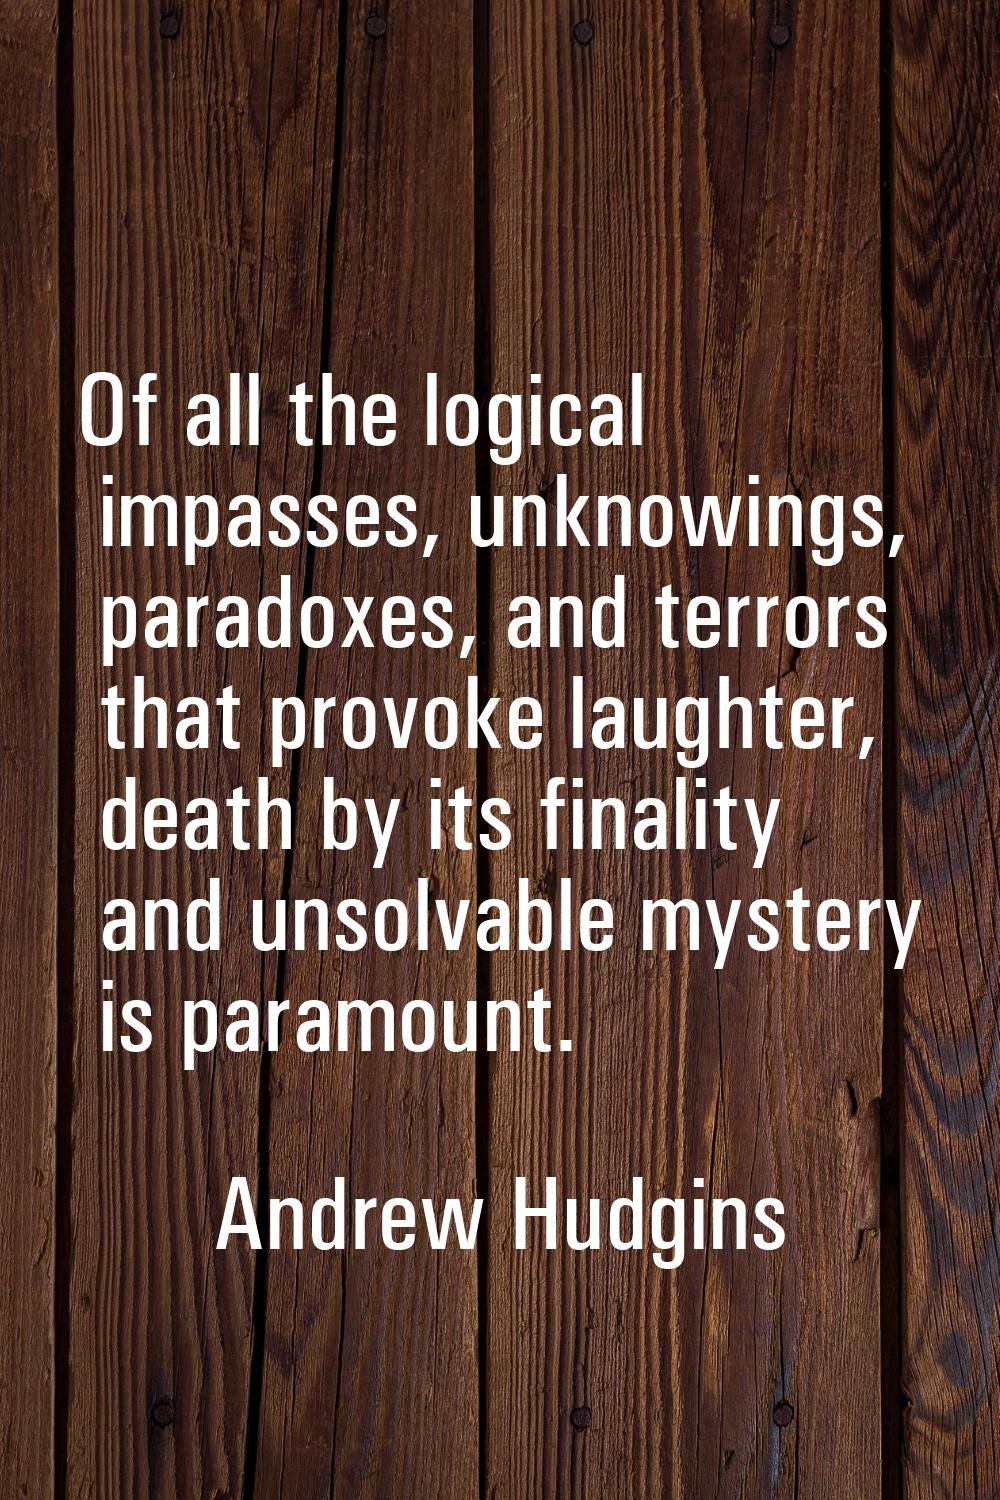 Of all the logical impasses, unknowings, paradoxes, and terrors that provoke laughter, death by its